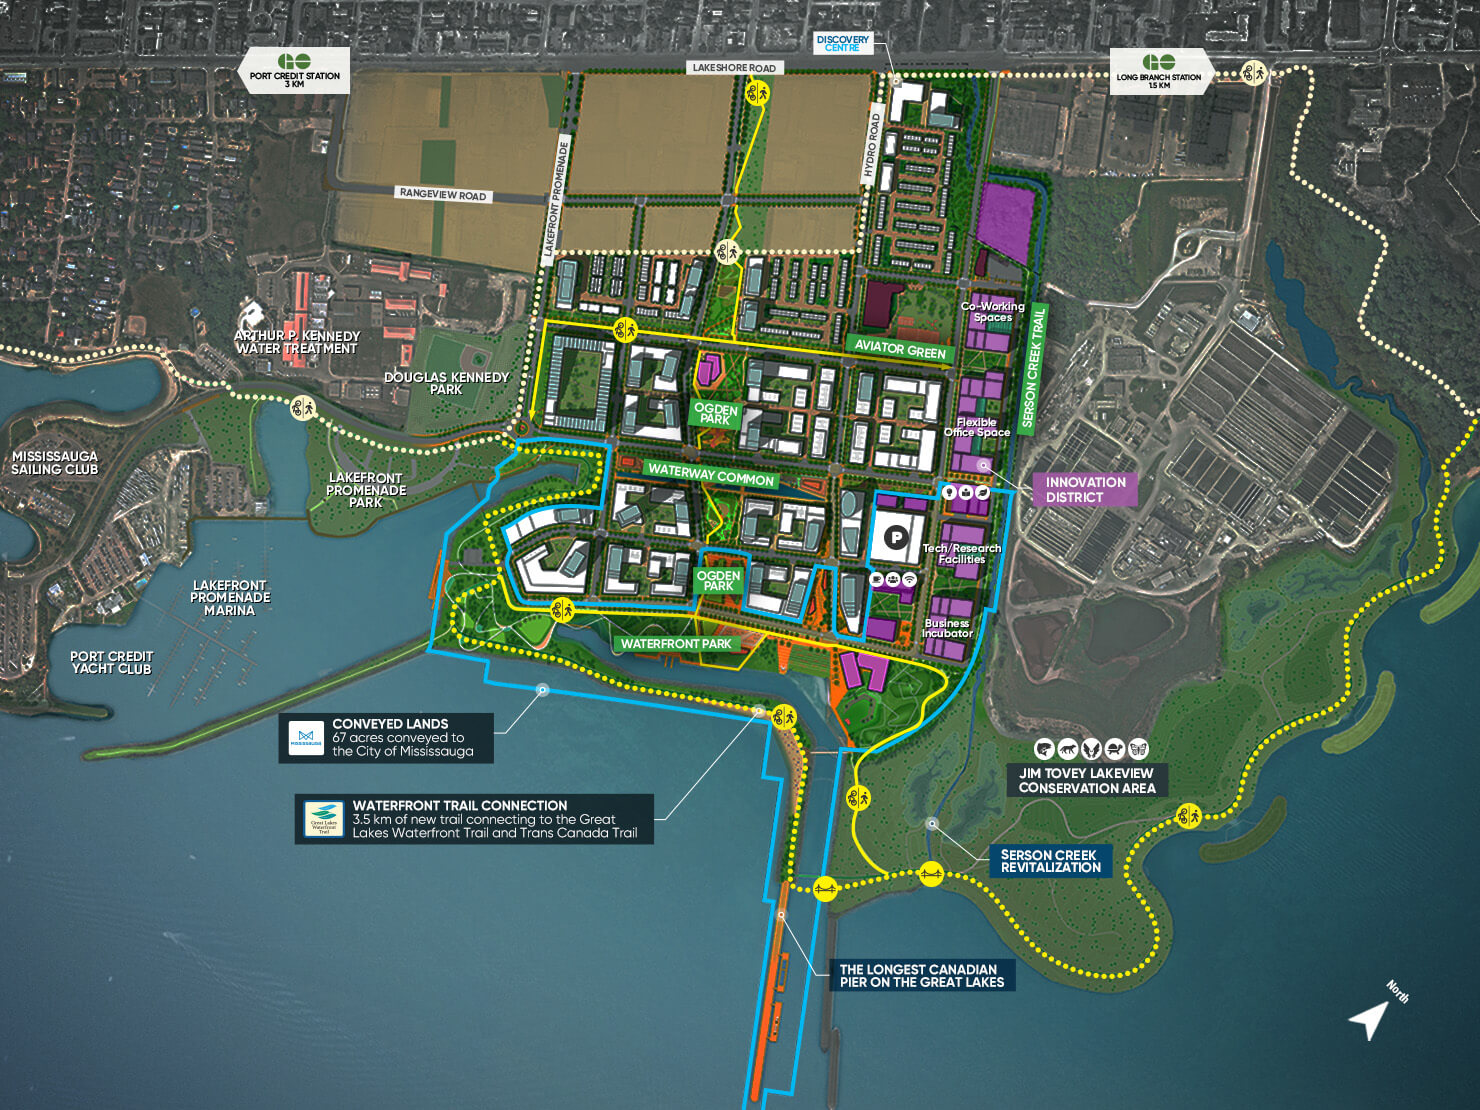 trails and parks map for lakeview village